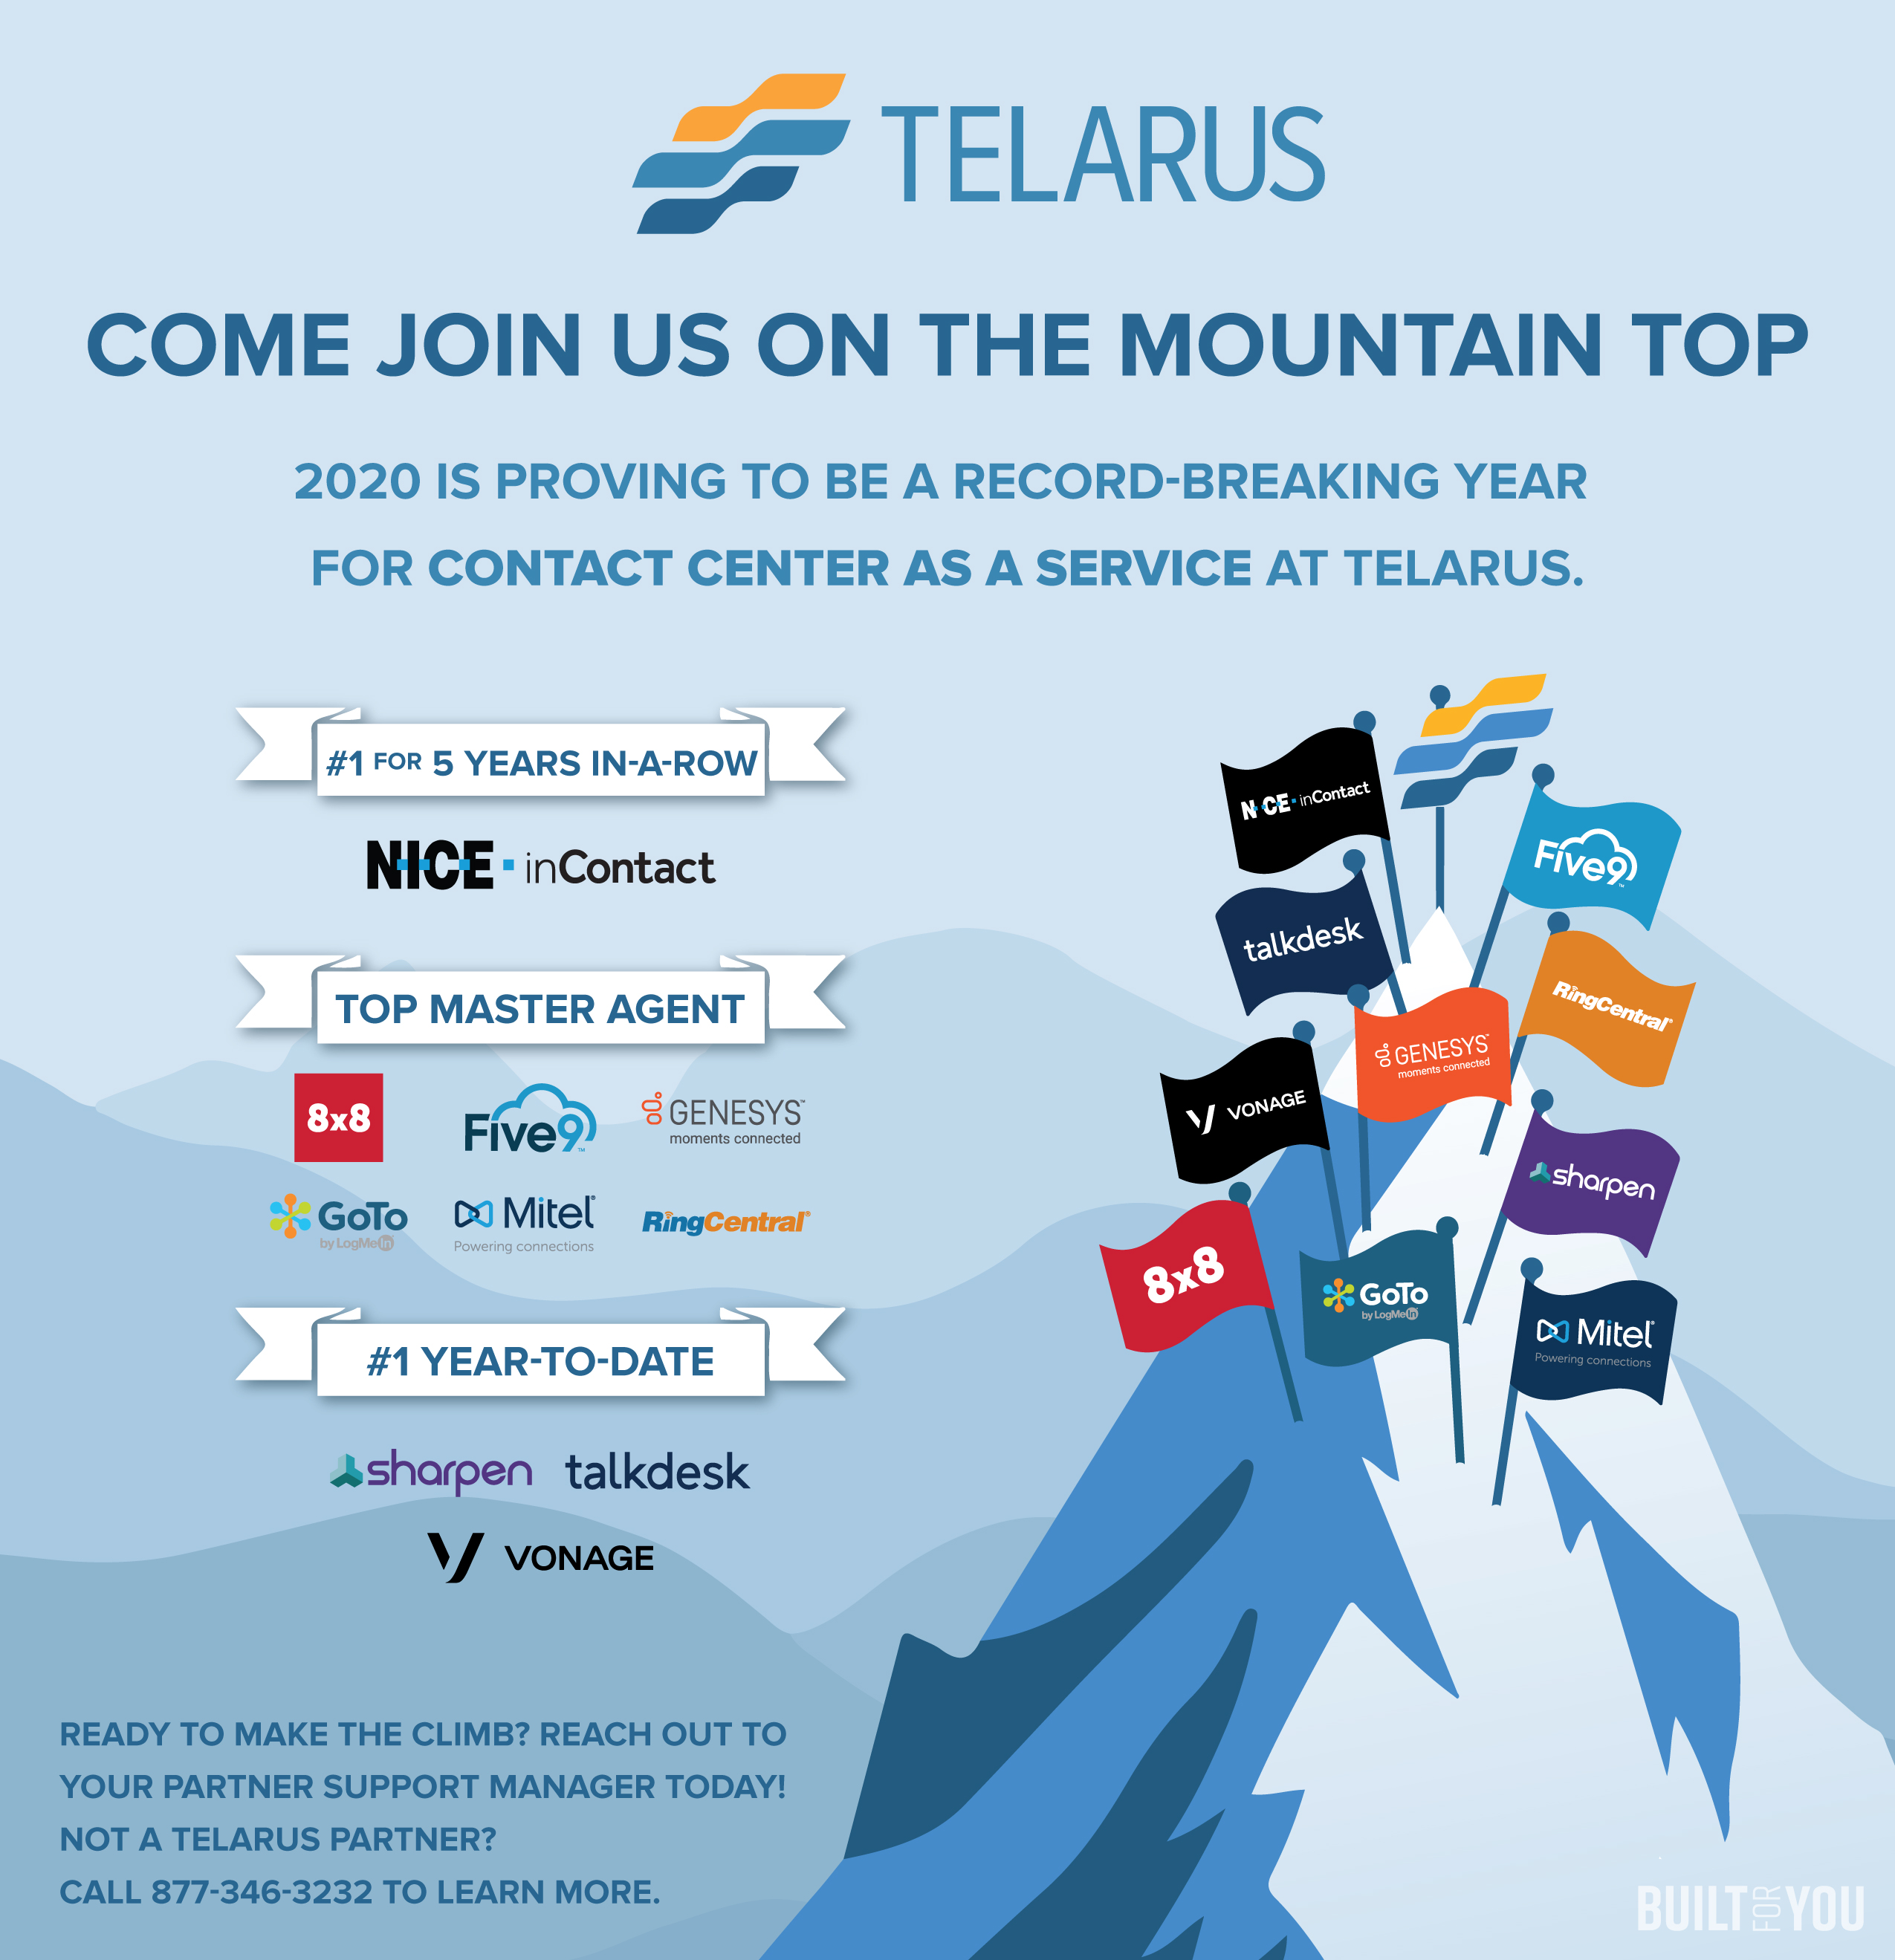 Join Telarus on the Mountain Top